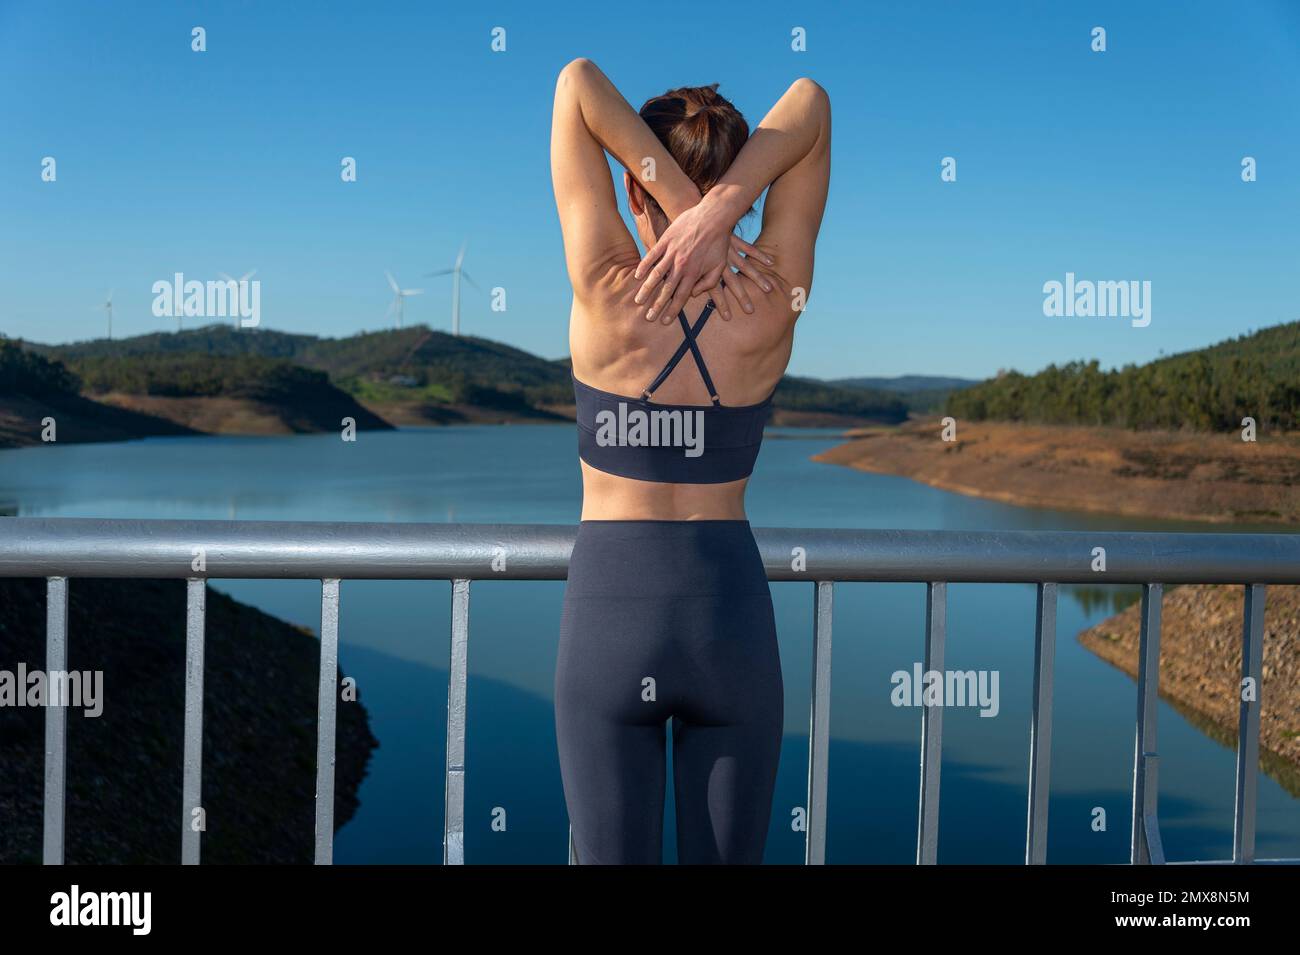 Rear view of a sporty woman doing an arm stretch warm up exercise, outside by a lake. Stock Photo